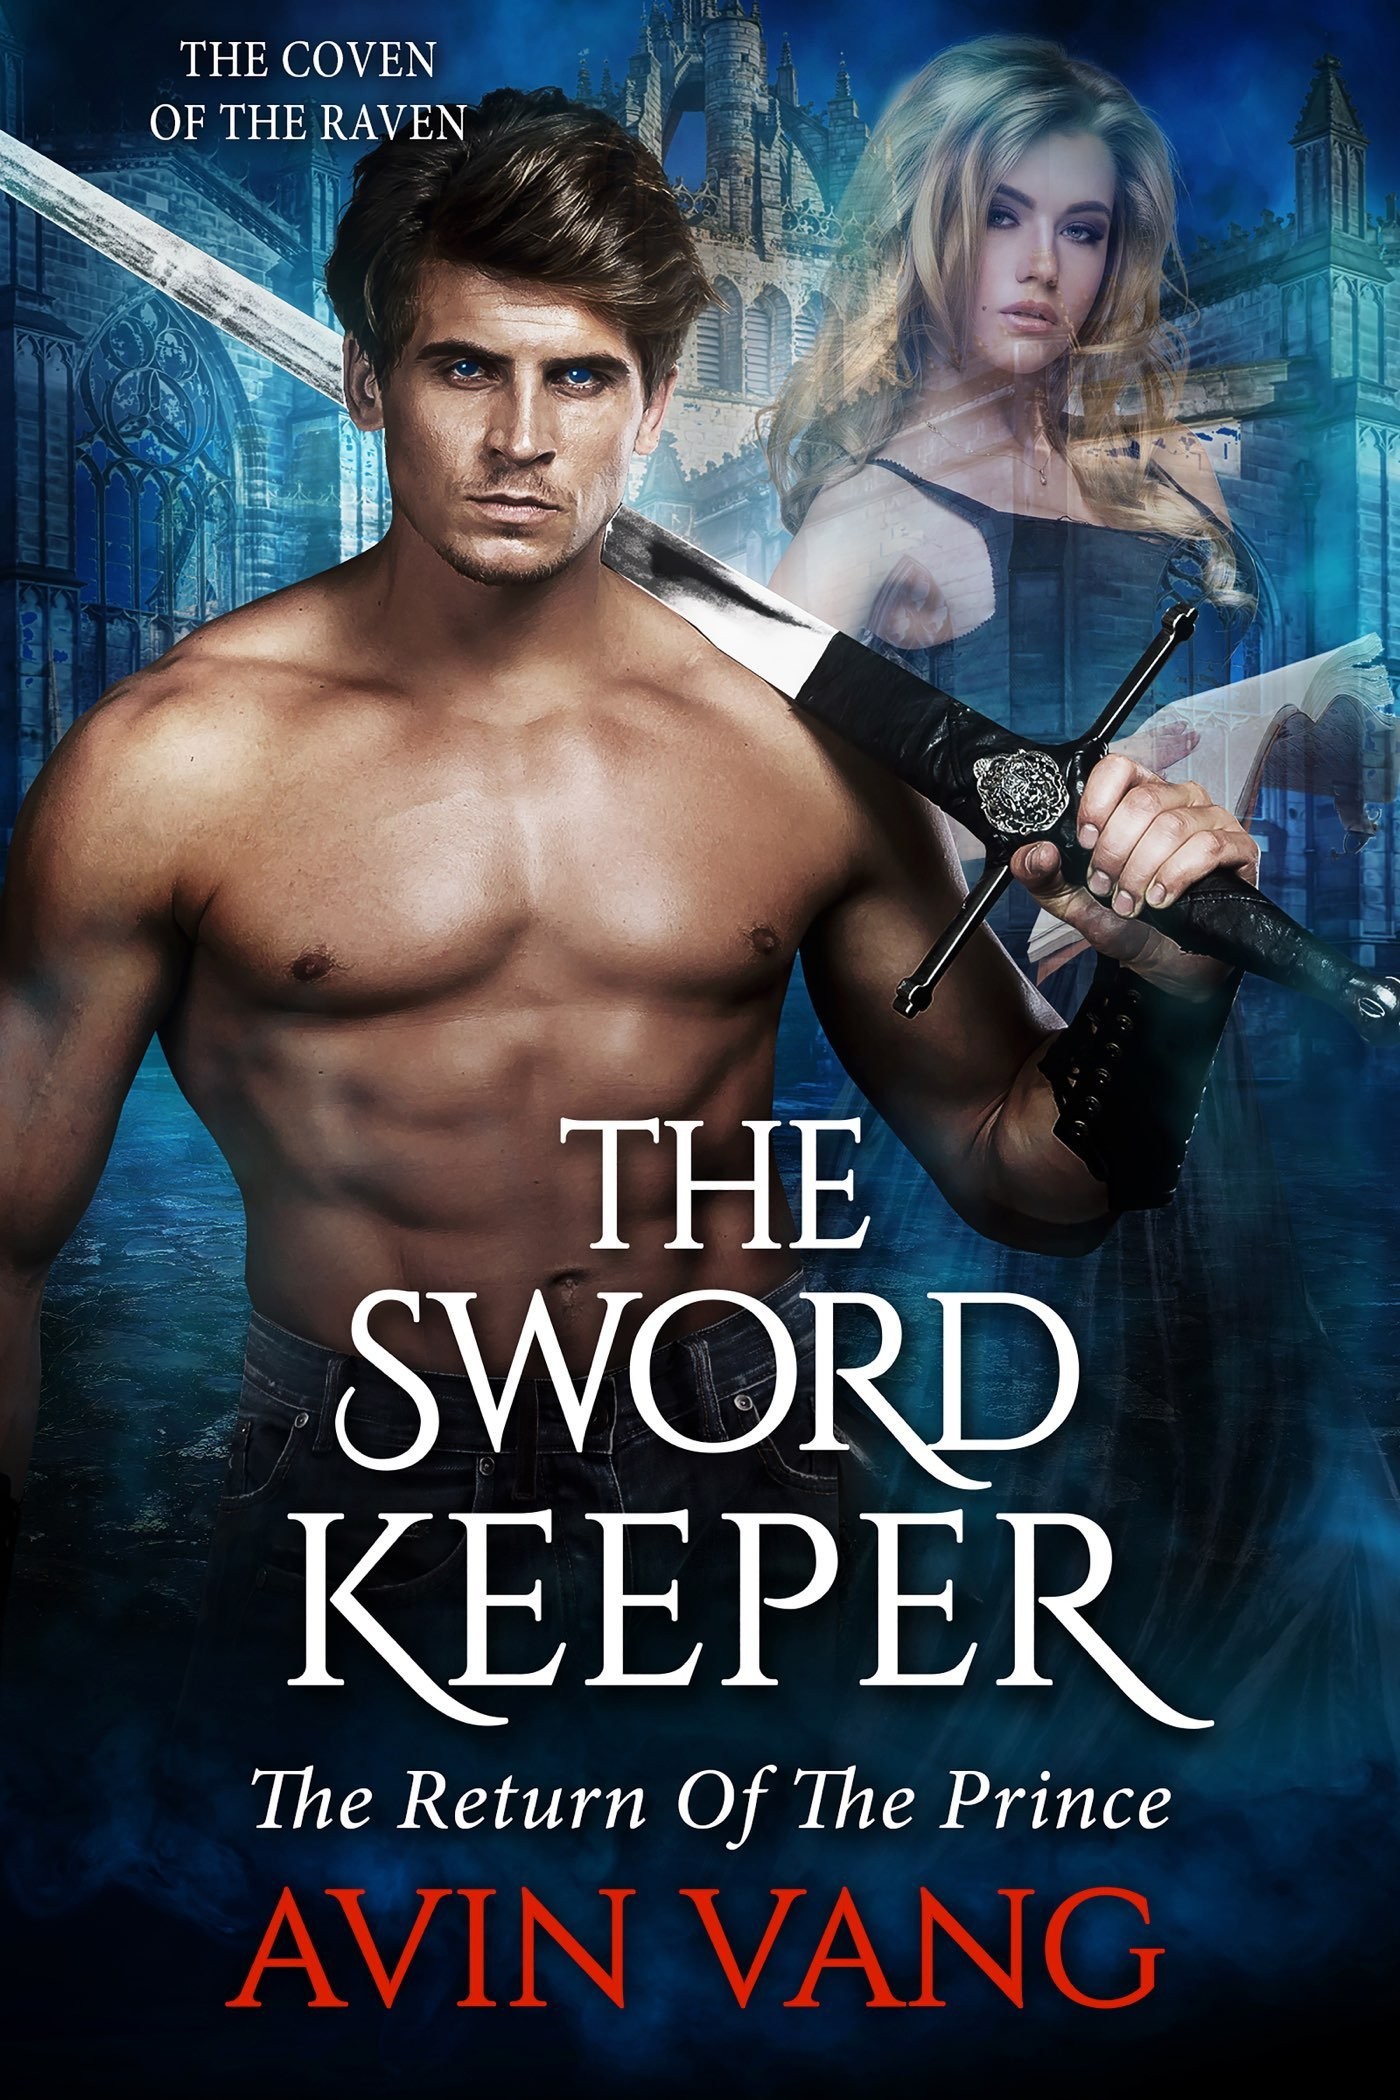 The Sword Keeper